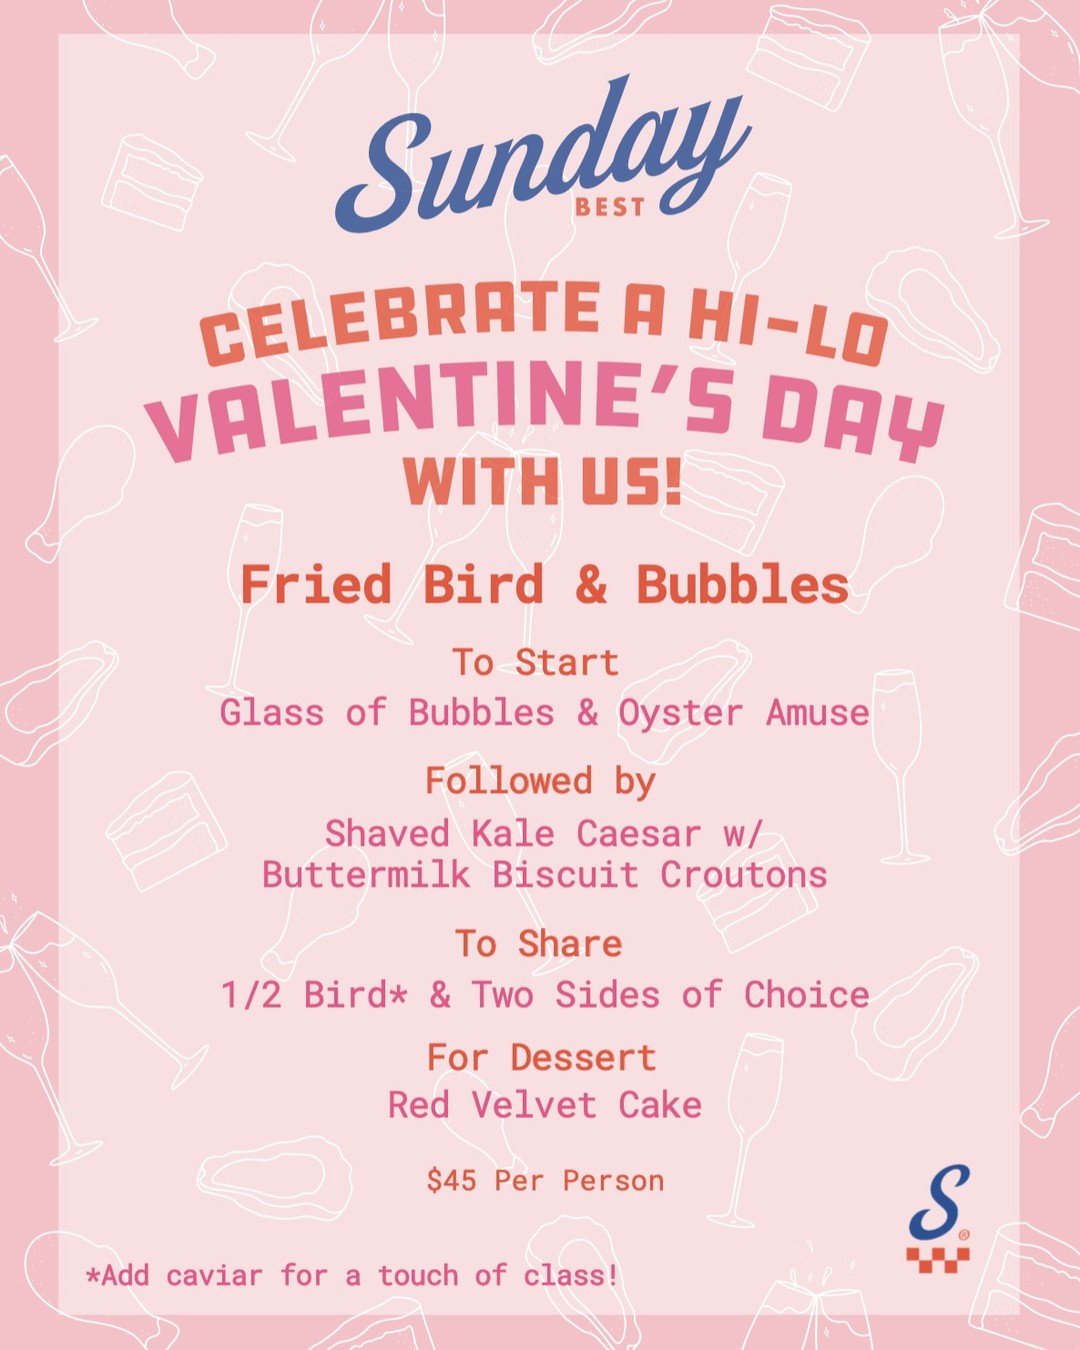 A Hi-Lo Valentine's. Fried Chicken and Bubbles. Two great things, together. Tired of overly expensive valentine's options we got you. Come see us!